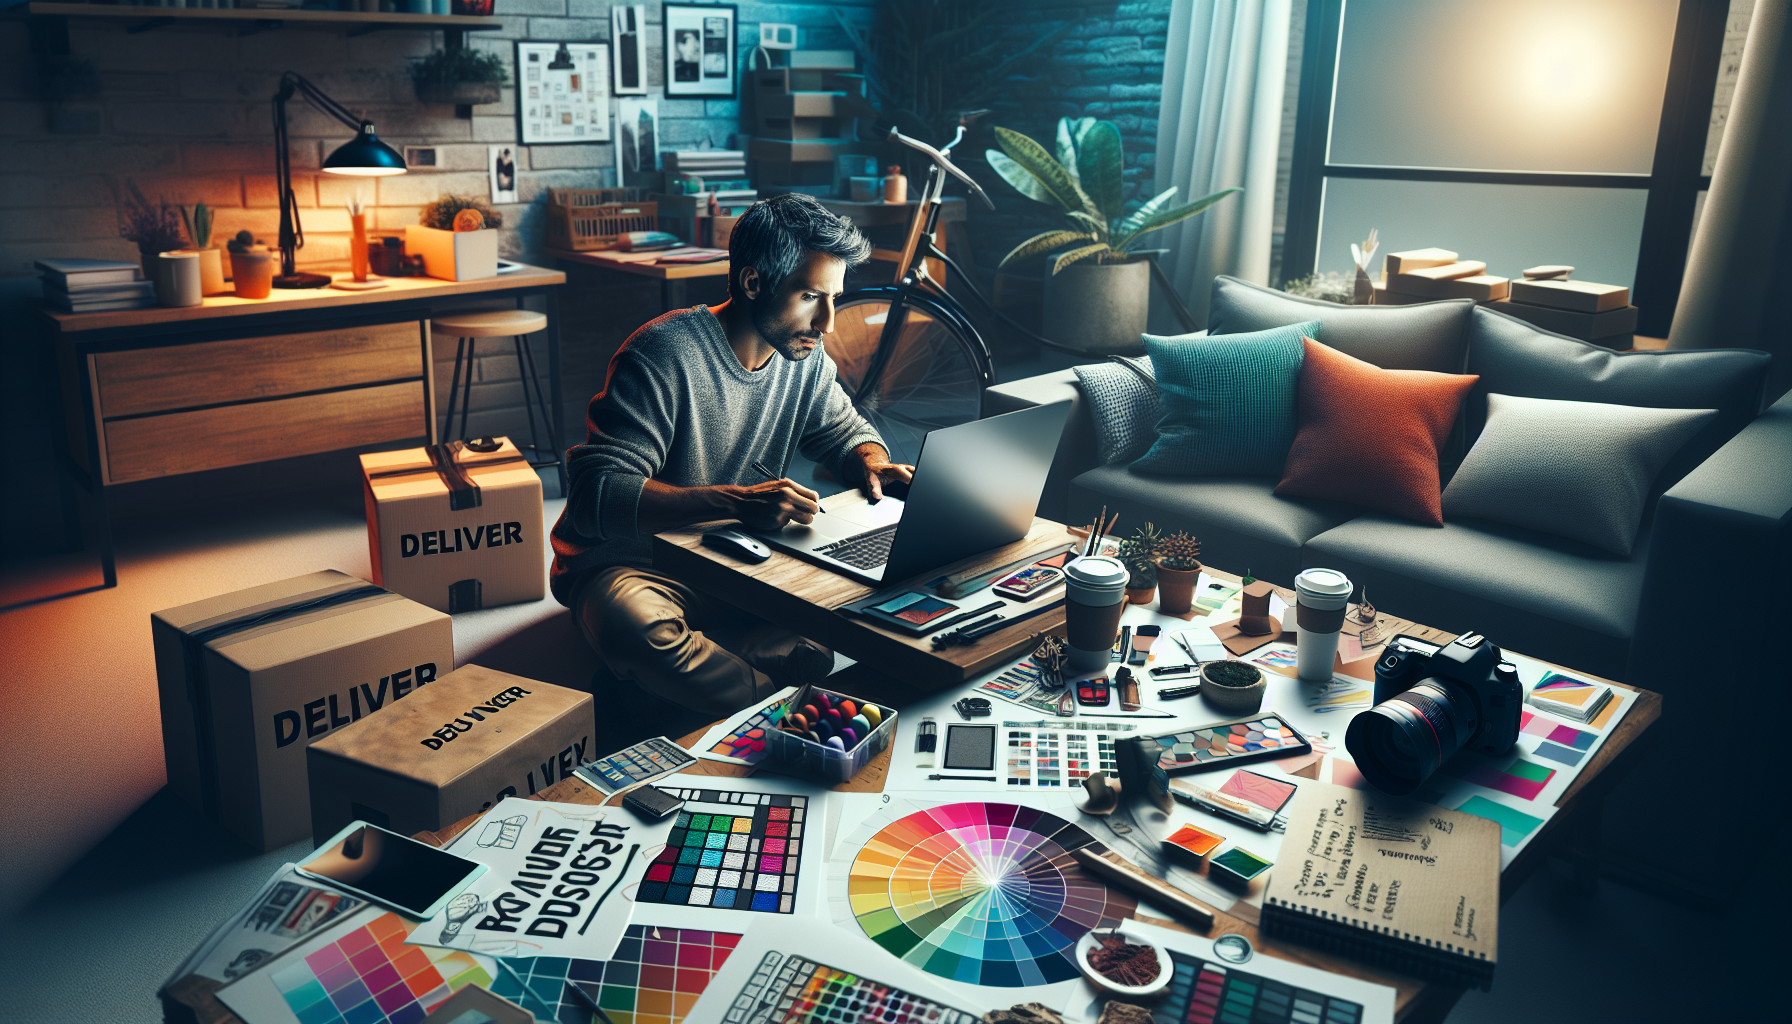 Create an image of a person working on a laptop in a cozy home office setting with visible items representing various side gigs, such as a camera for photography, graphic design sketches, a delivery bag, and a notebook with writing ideas. The scene should evoke a sense of productivity and financial growth.